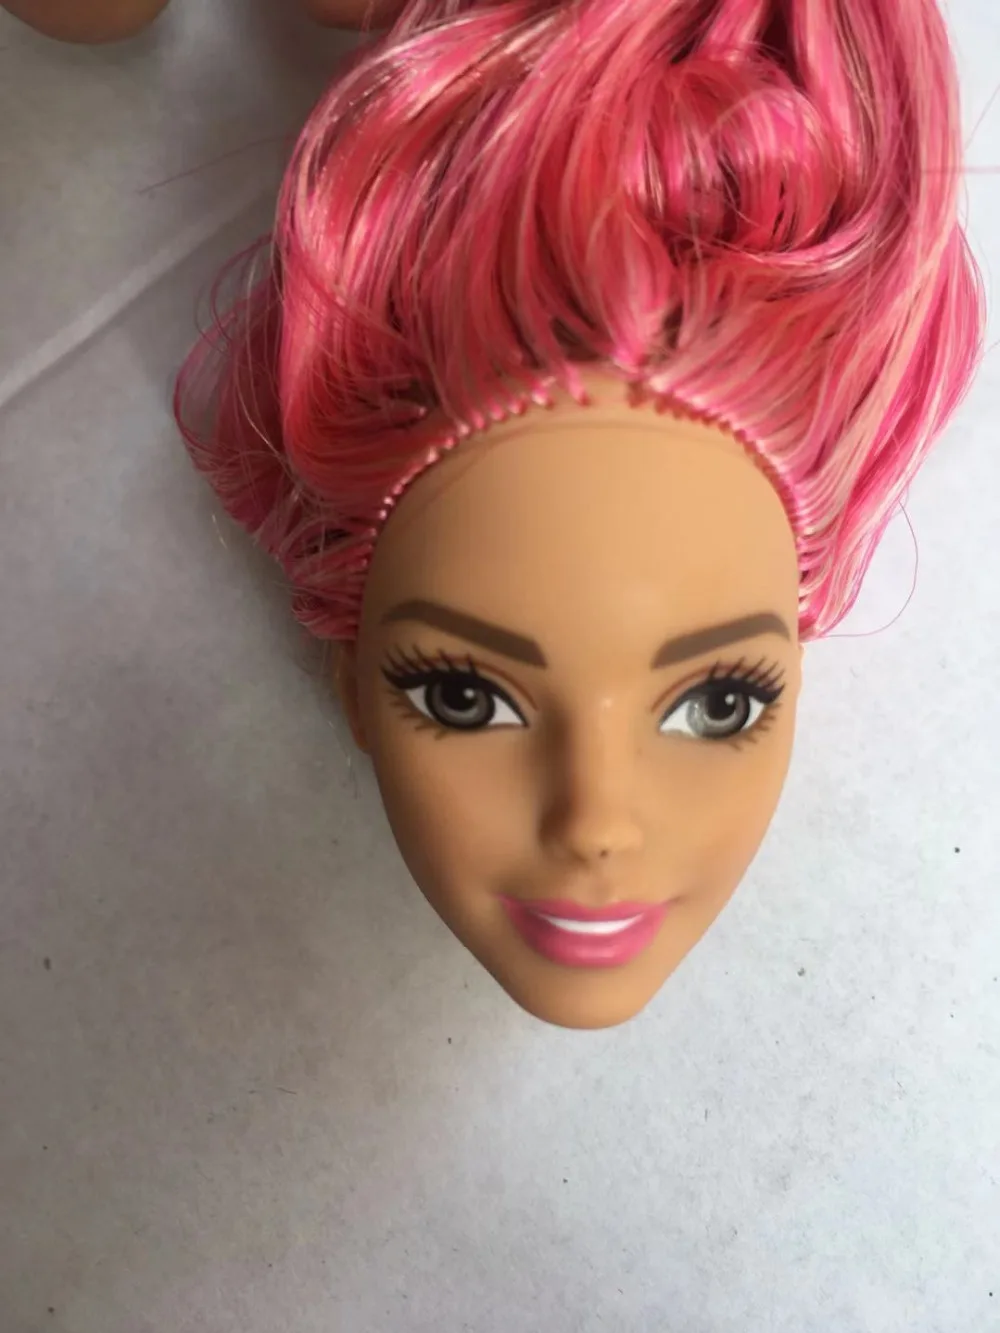 dimple-face-doll-heads (31)